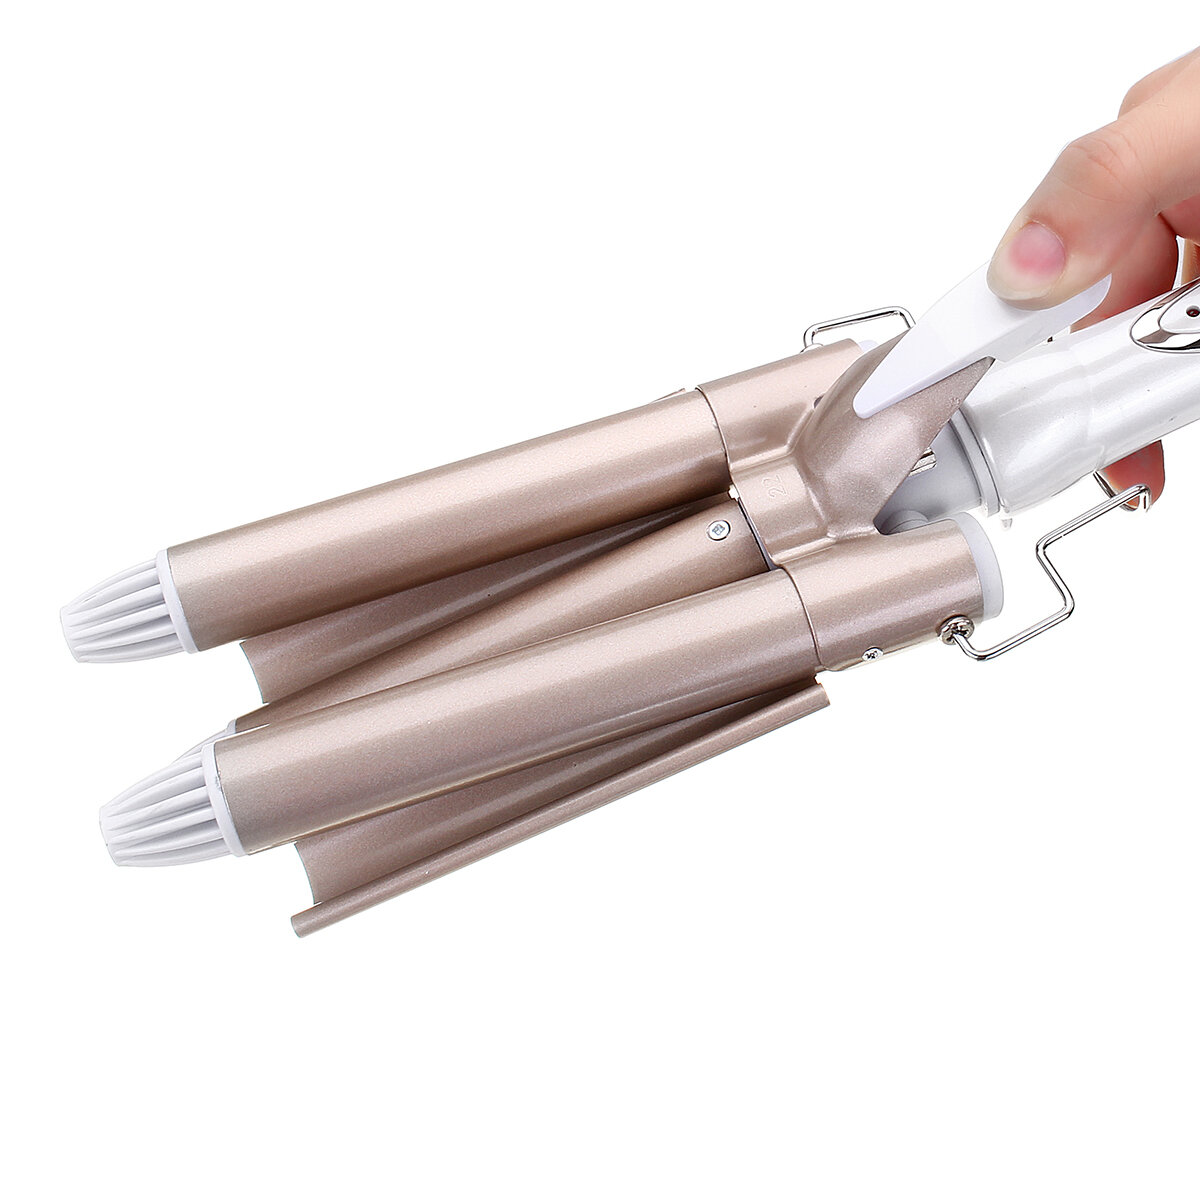 Kemei KM-1010 Three Stick Curling Iron Hair Curler Curling Stick Water Wave Splint Large Curling Iron Hair Styling Tool